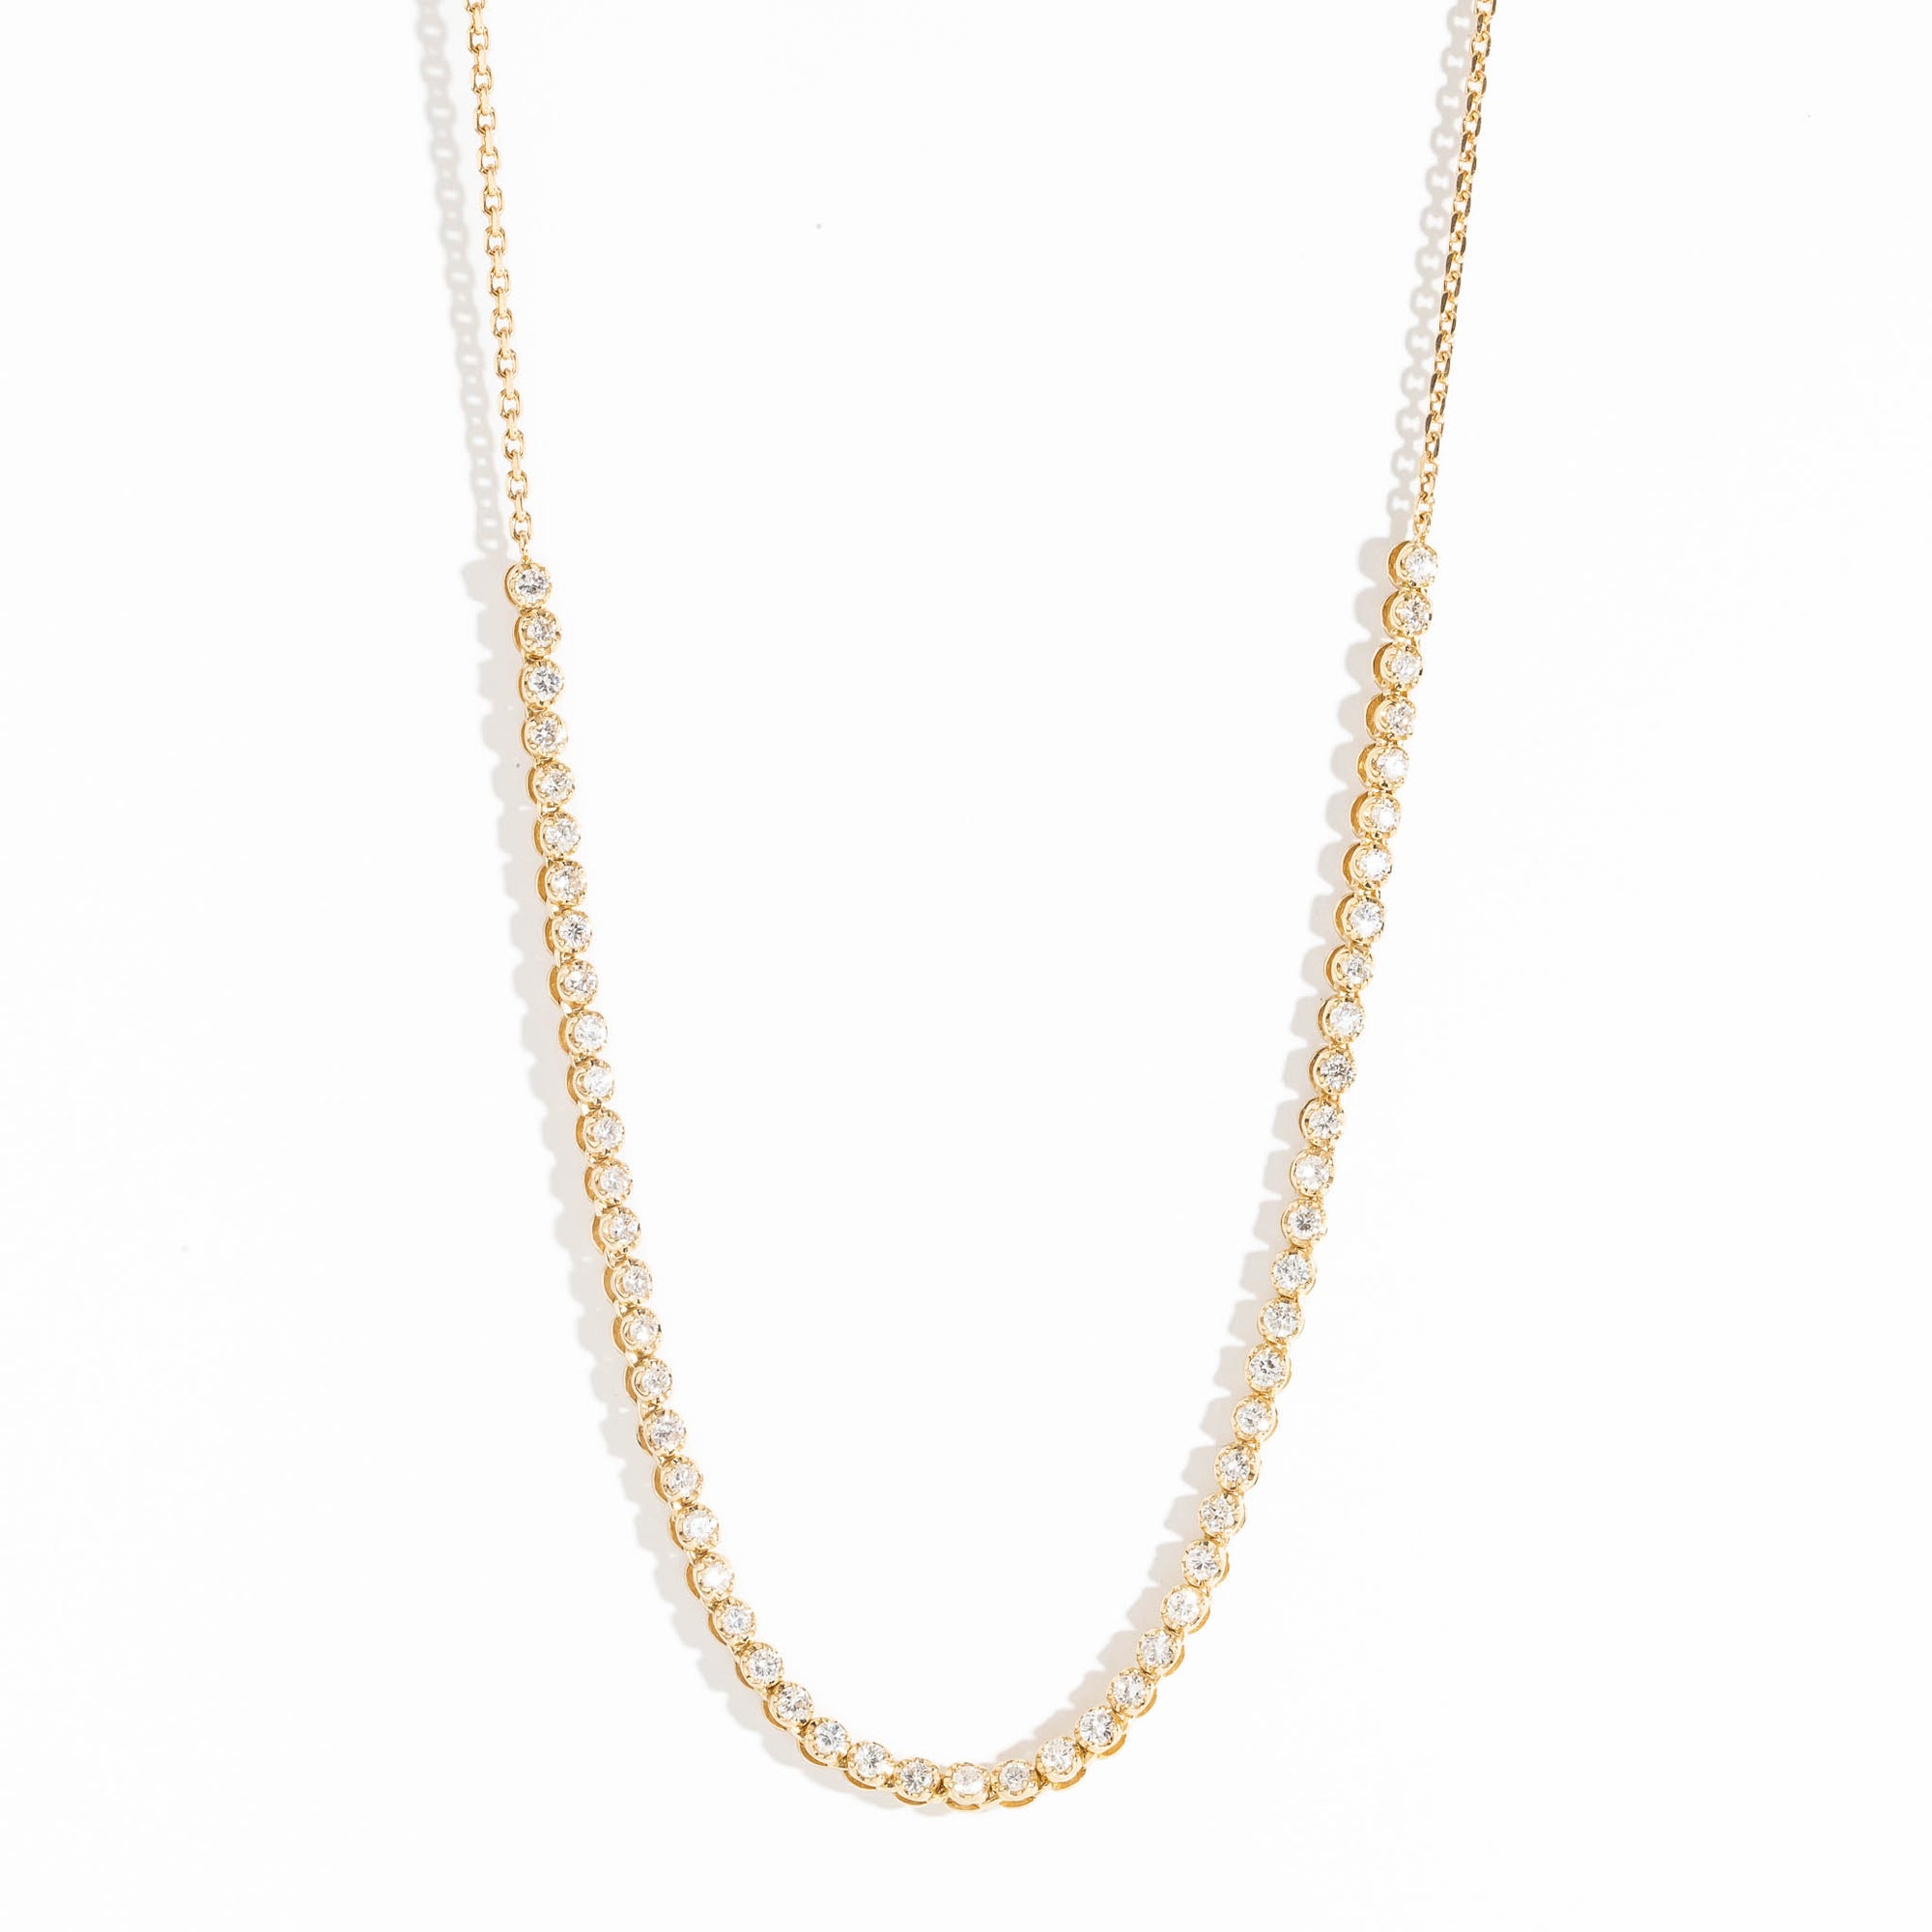  14 carat Yellow Gold tennis necklace with white diamonds